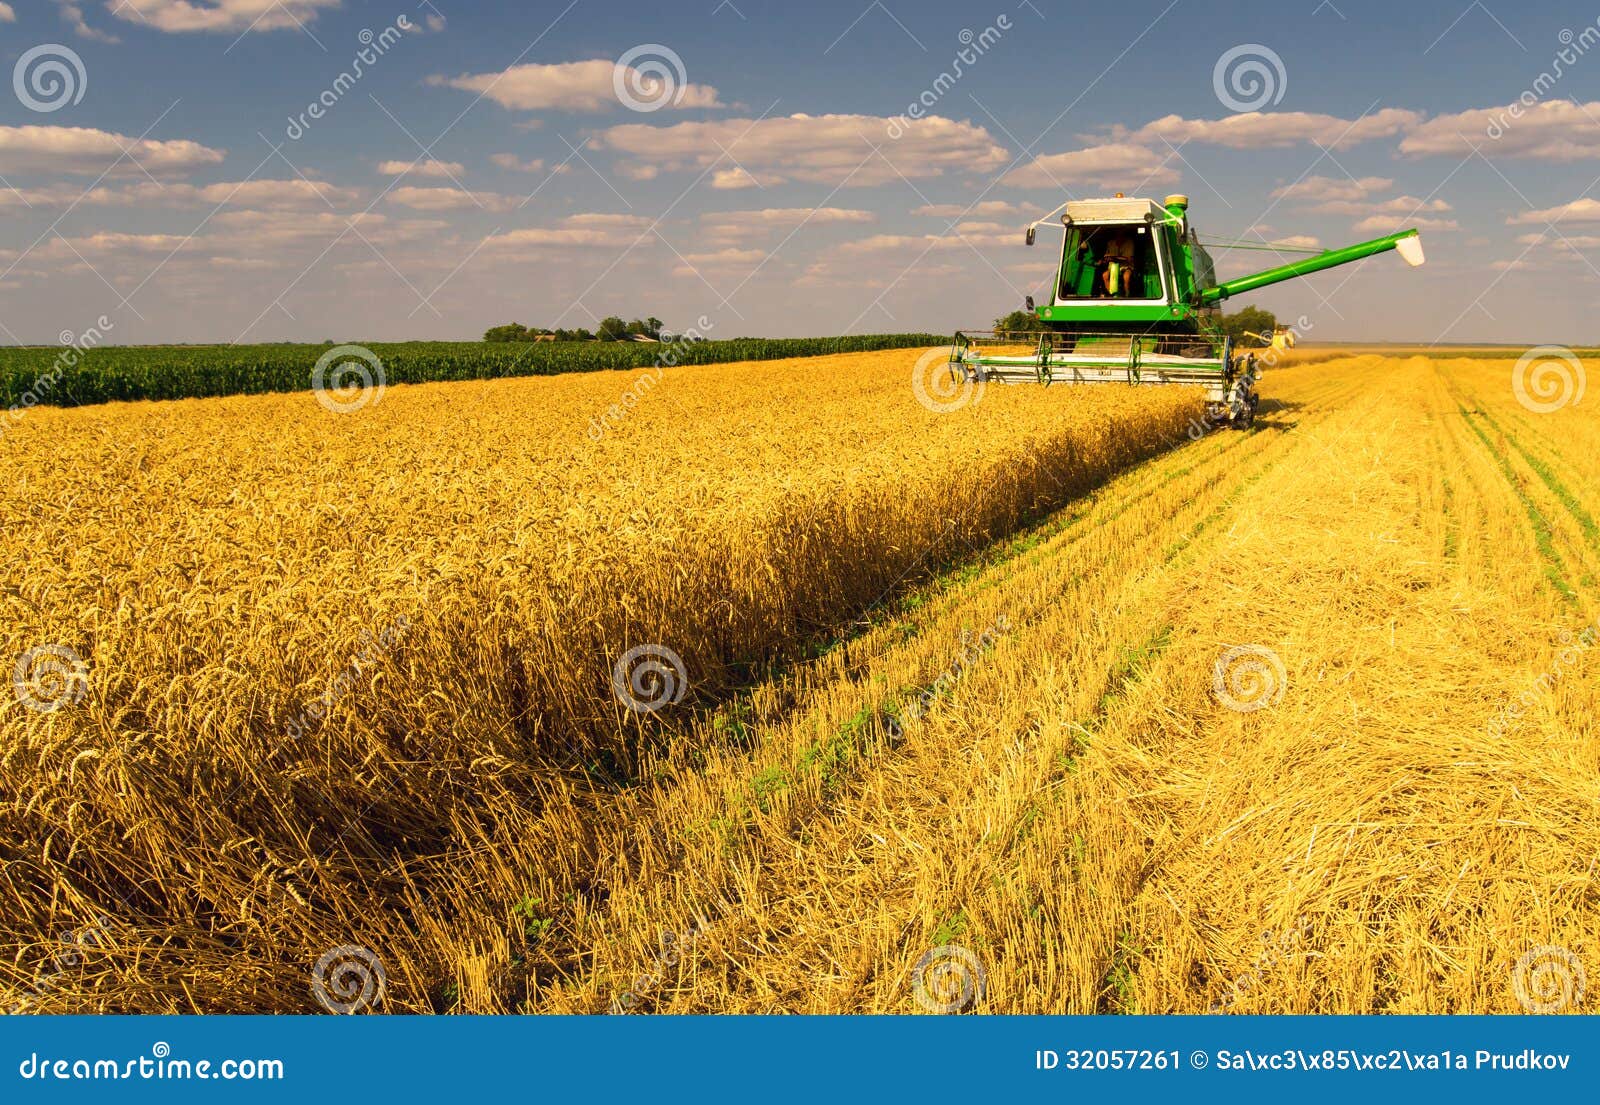 combine harvester working on the wheat field